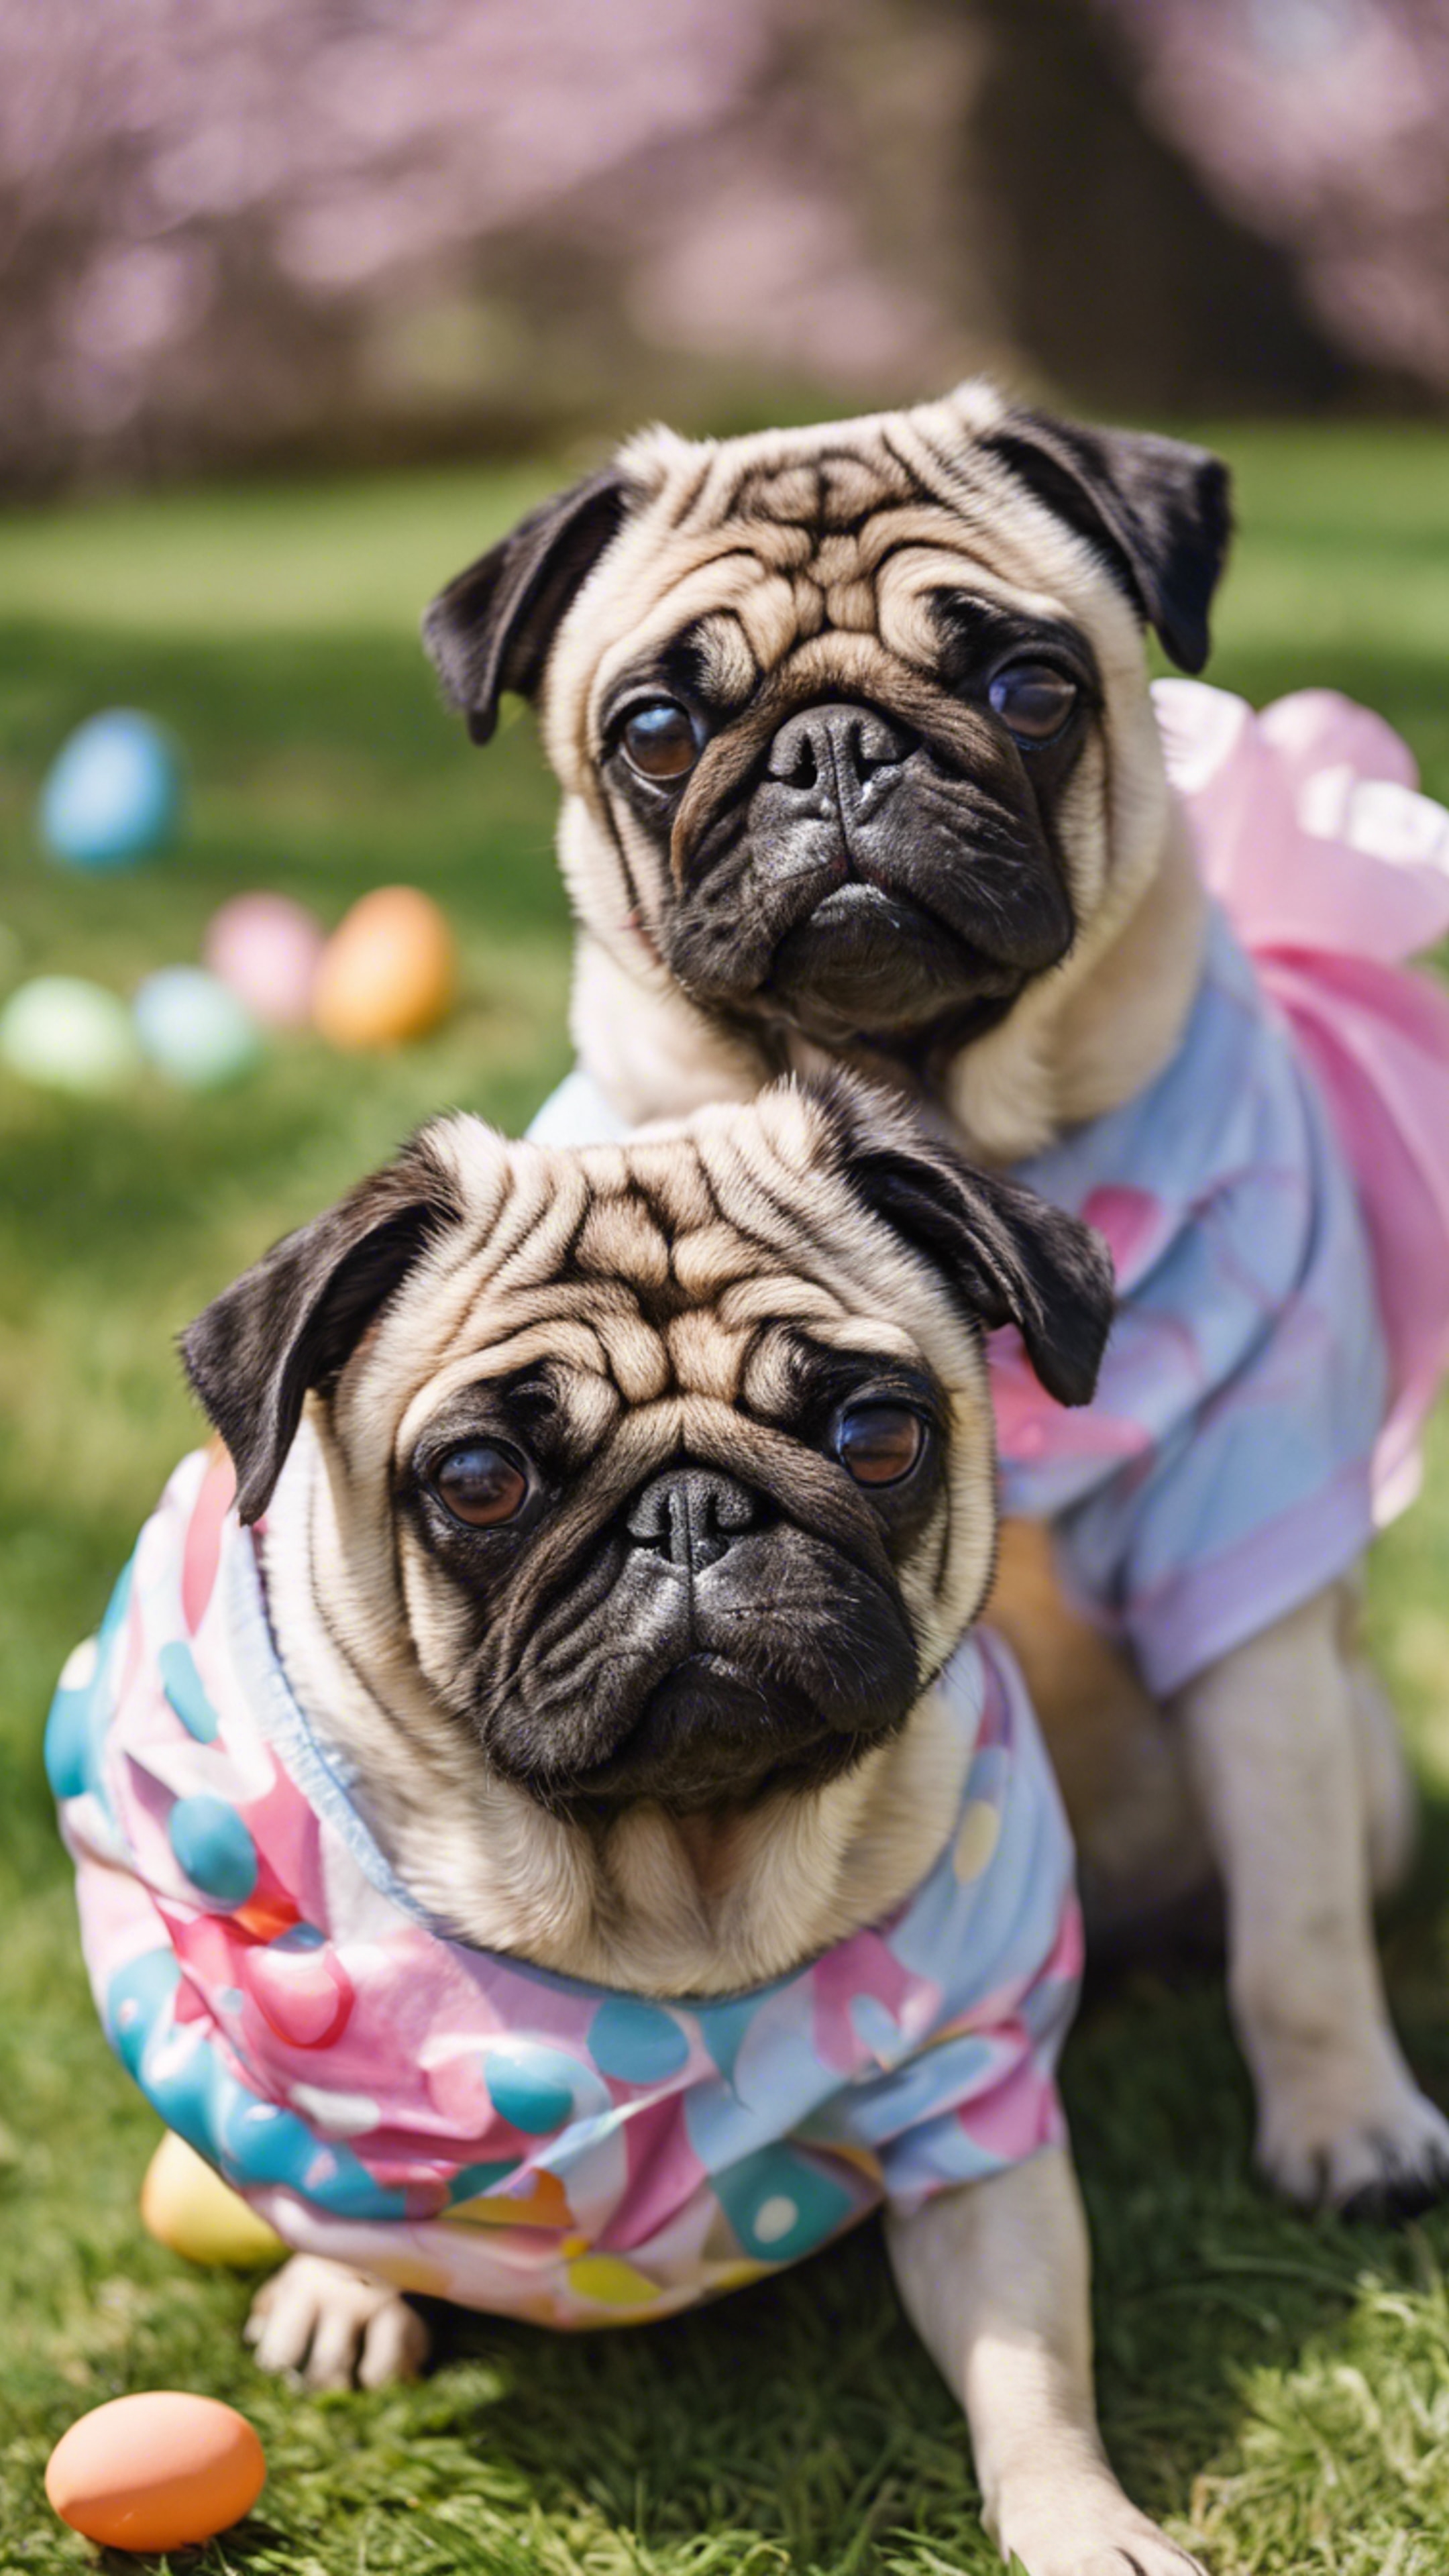 Whimsically dressed pugs participating in a local doggy Easter egg roll. Wallpaper[f2a3294fad0948aabbc9]